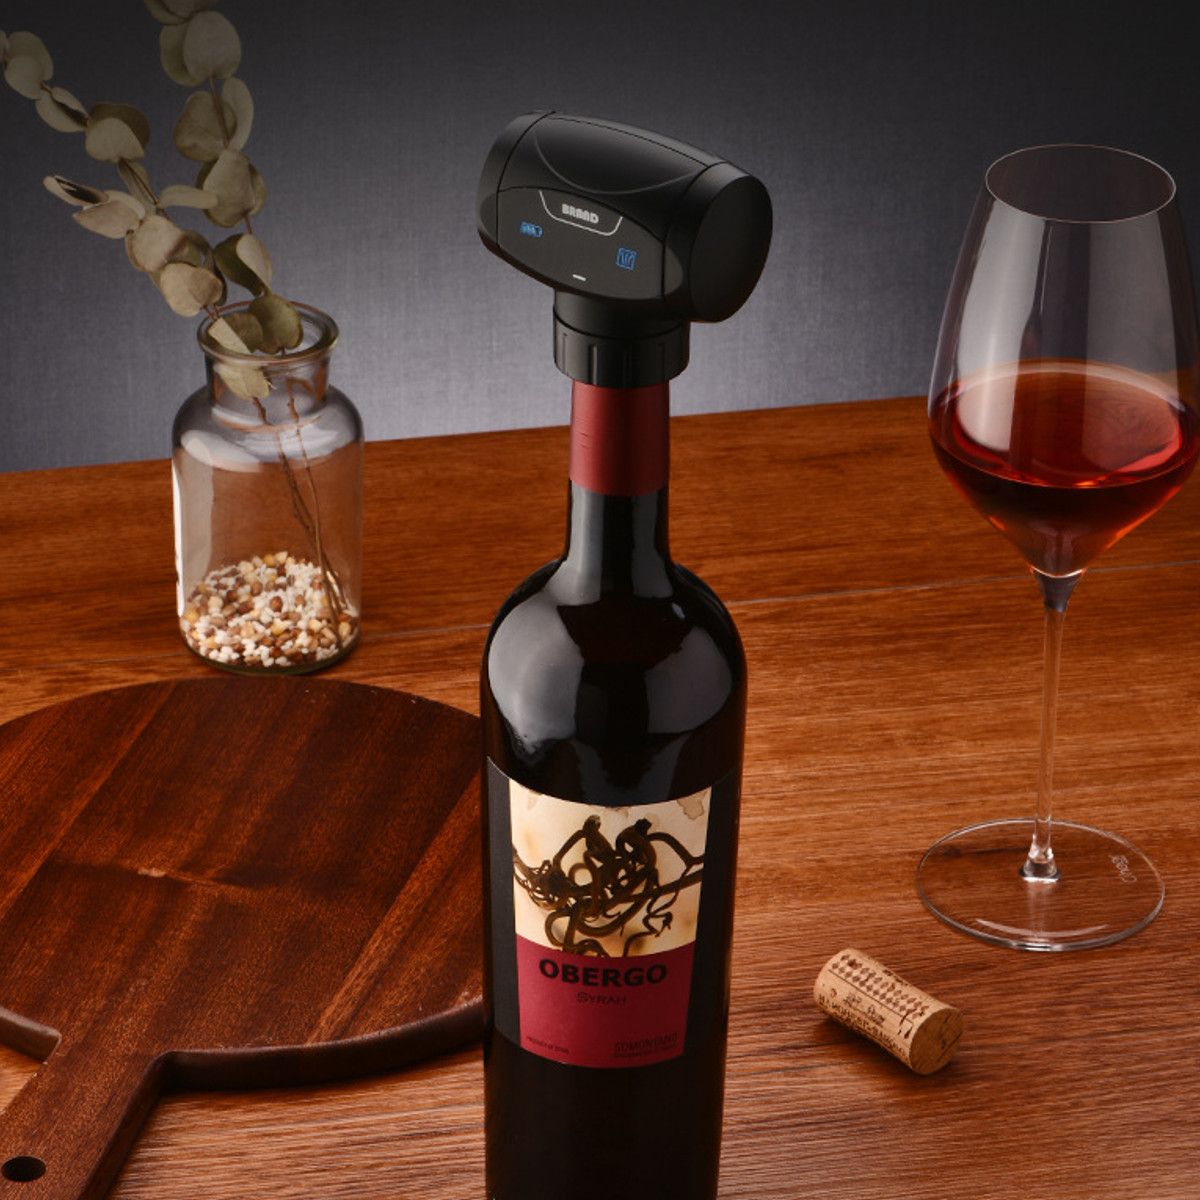 Portable-Electric-Wines-Stopper-Vacuum-Preservation-Saver-Automatic-Wines-Sealed-Cork-Bar-Accessorie-1762445